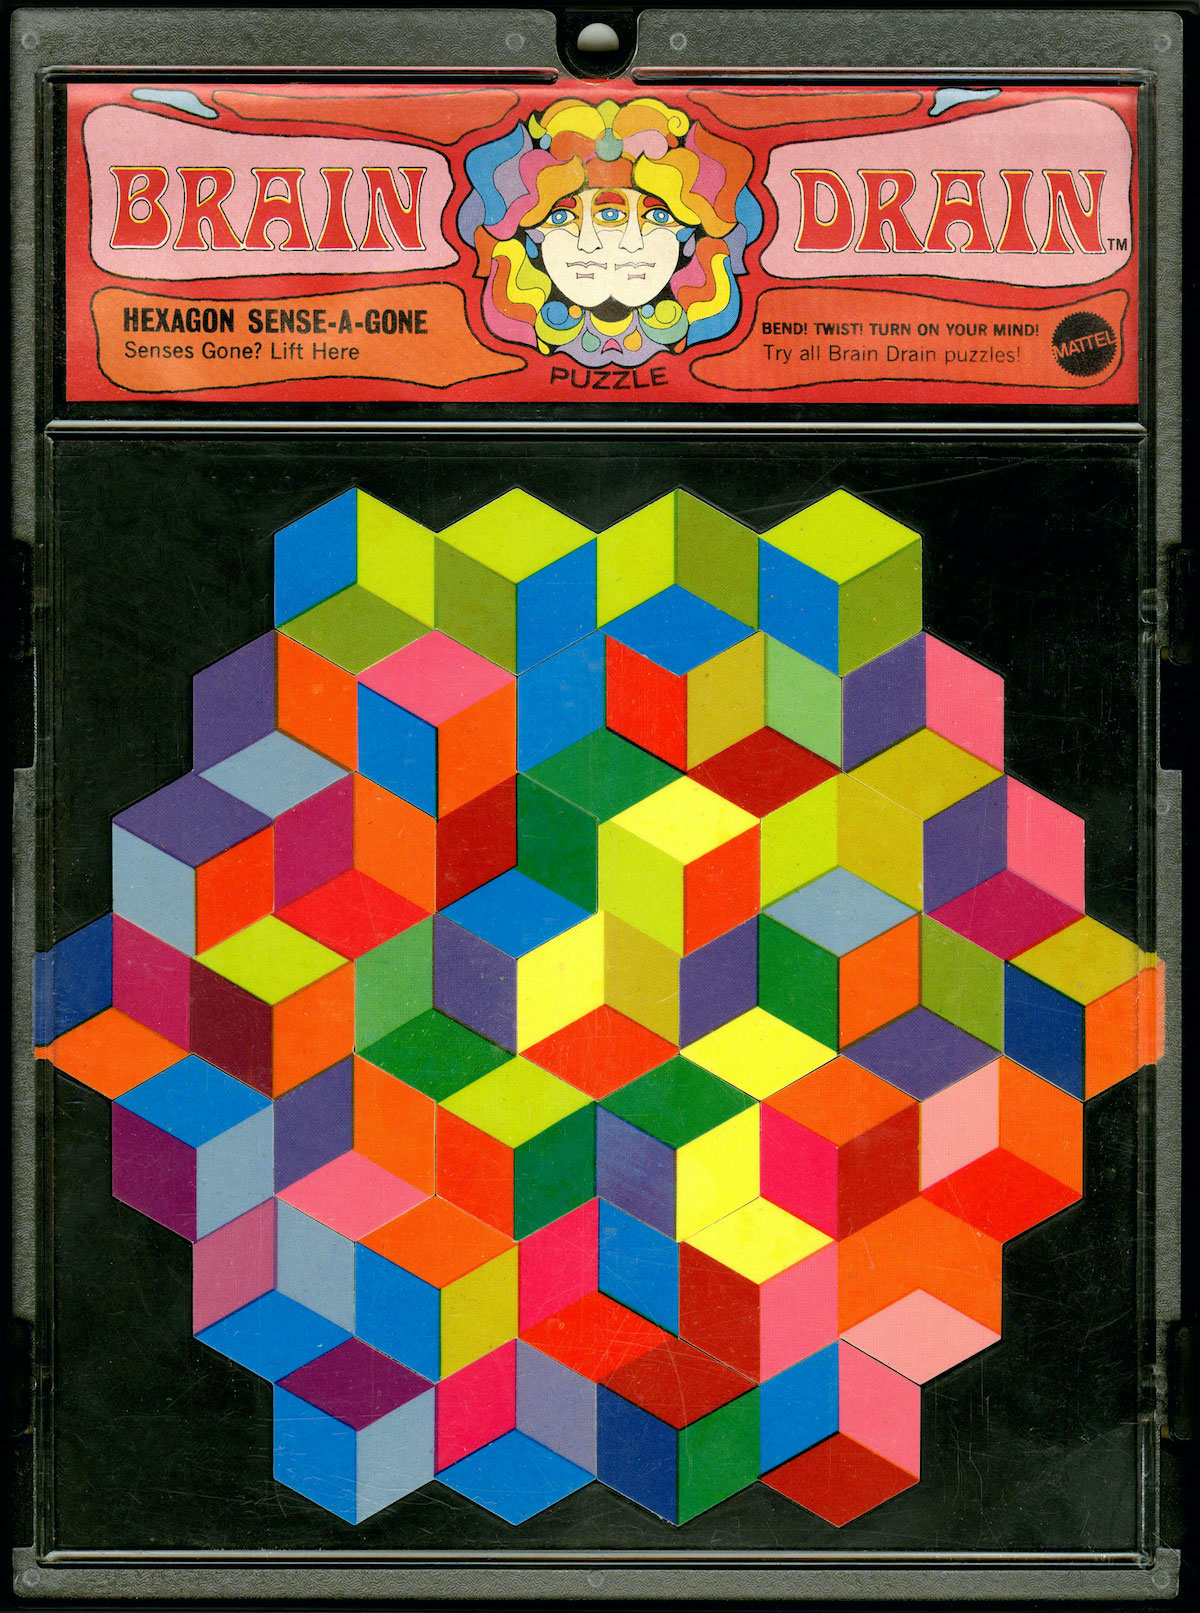 Blend! Twist! Turn on your mind!” Brain Drain puzzles by Mattell